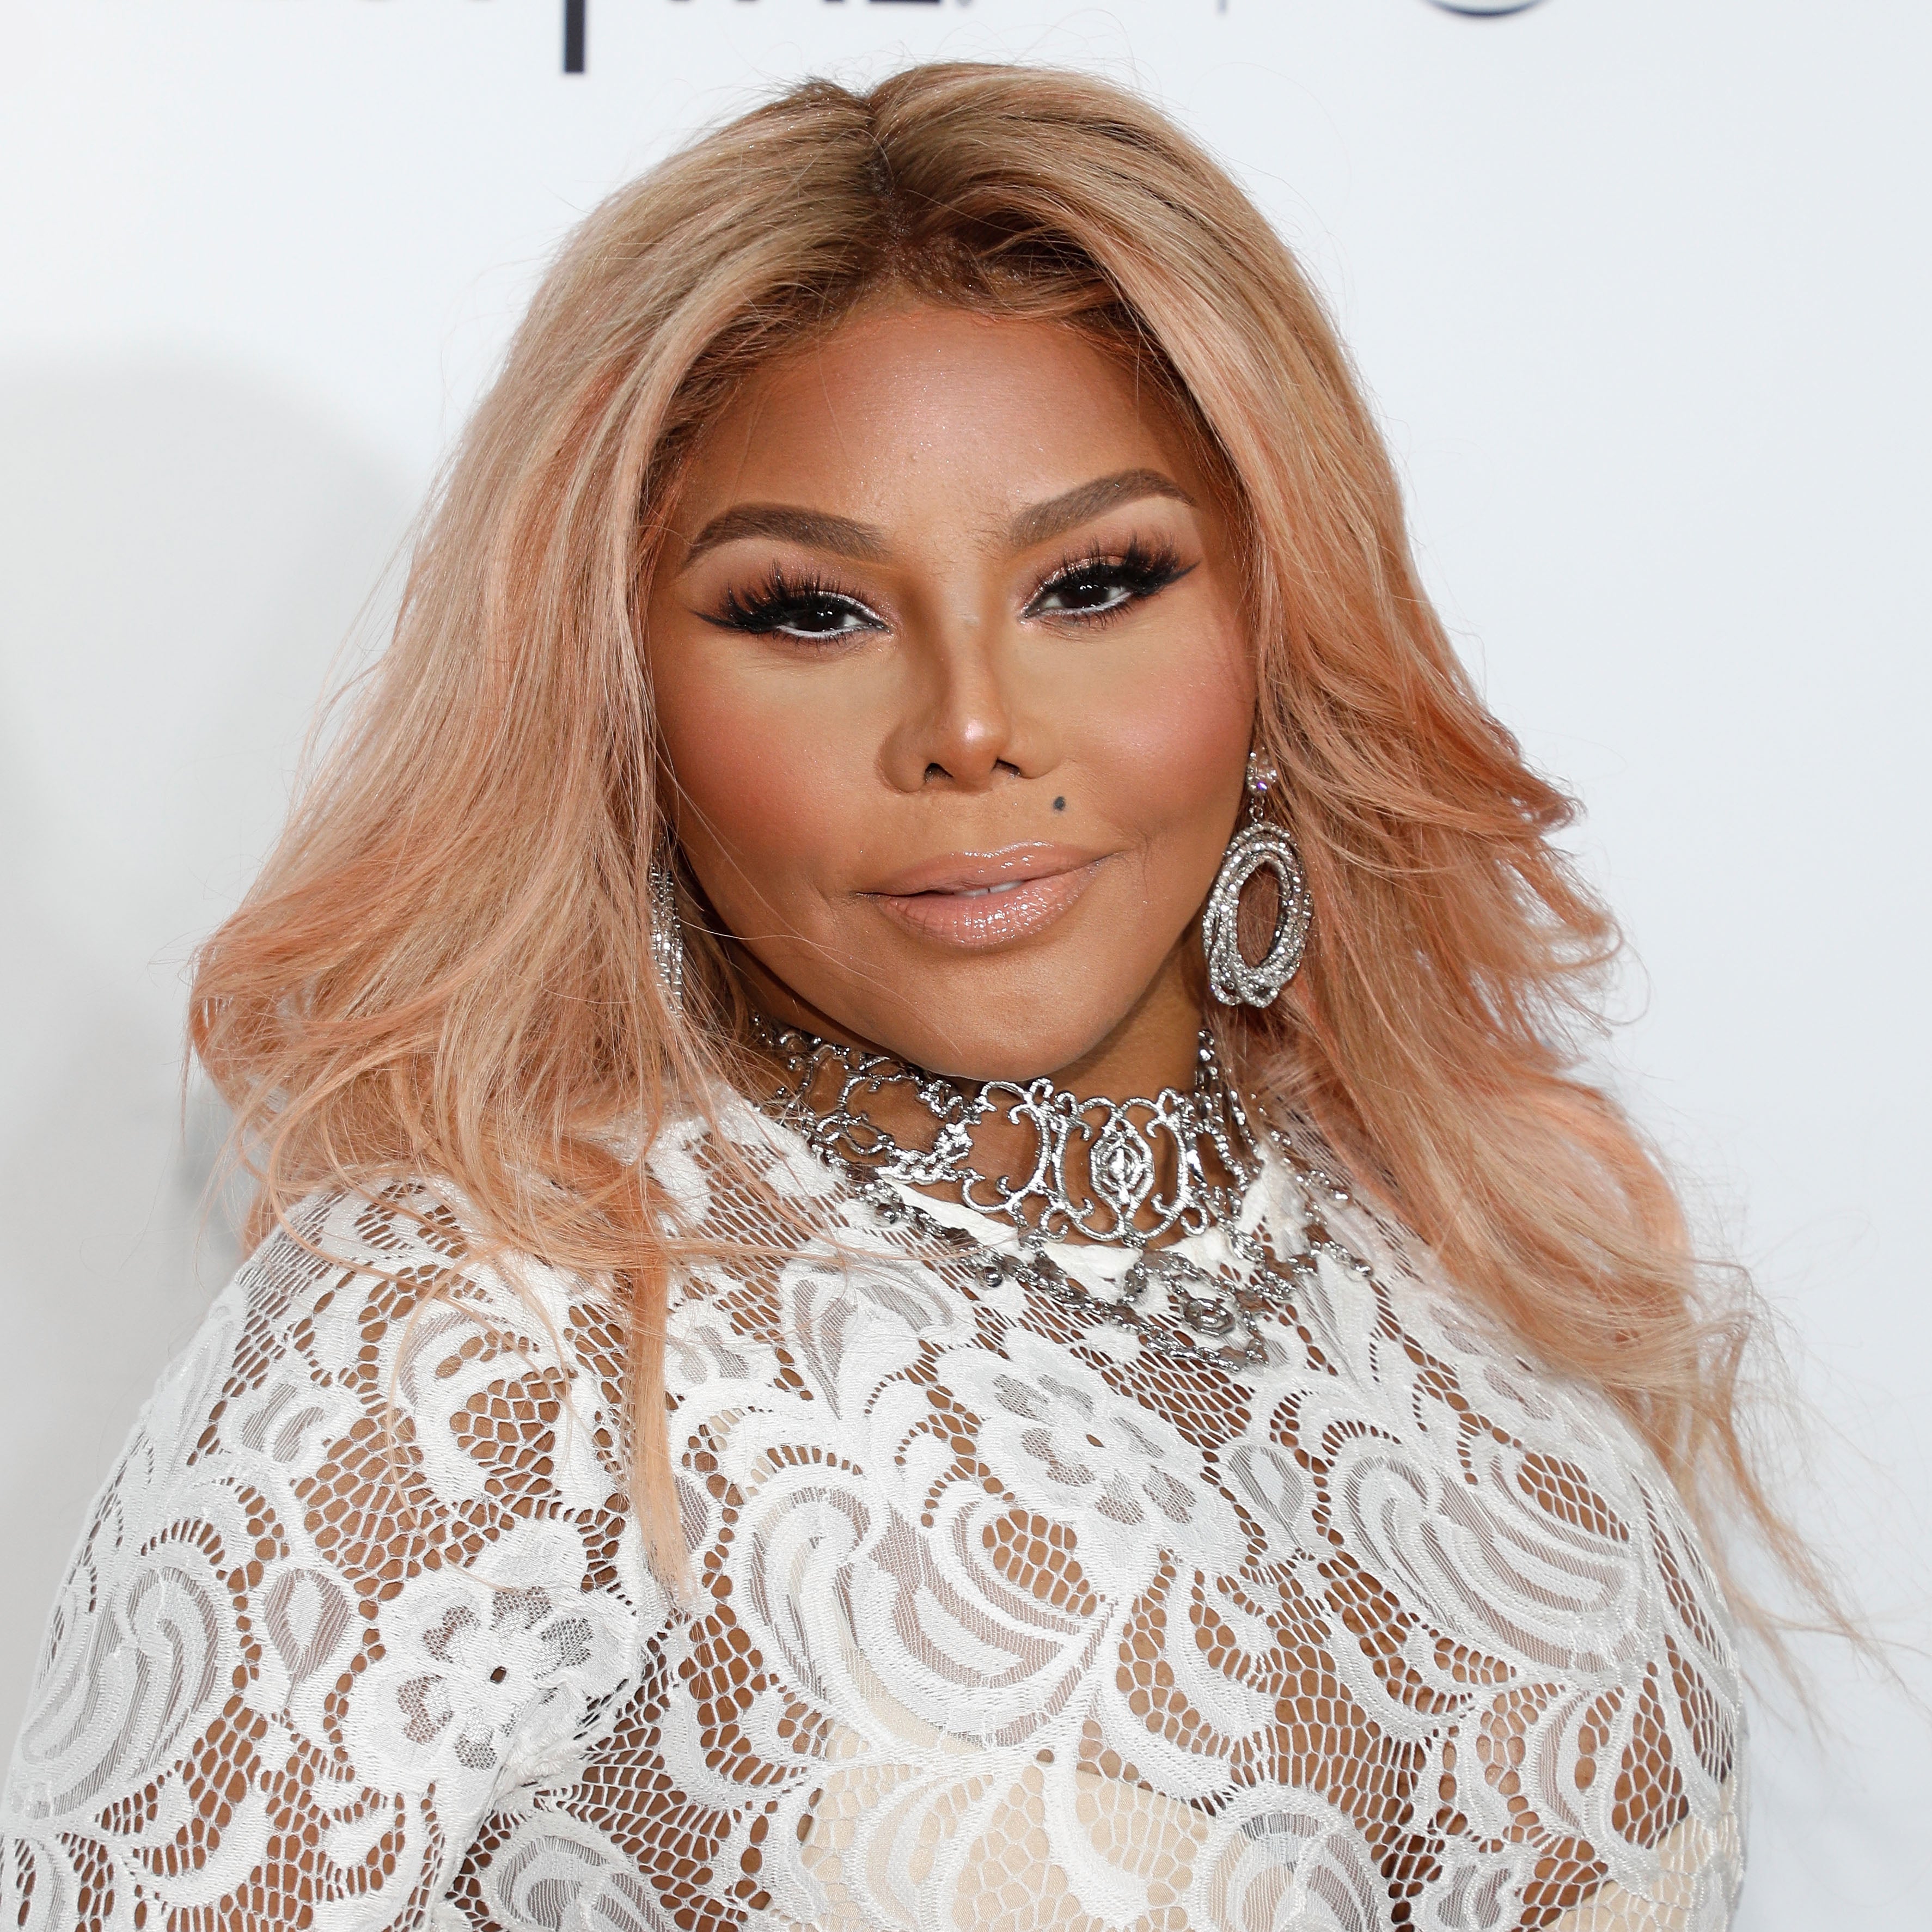 Lil' Kim: Then and Now
